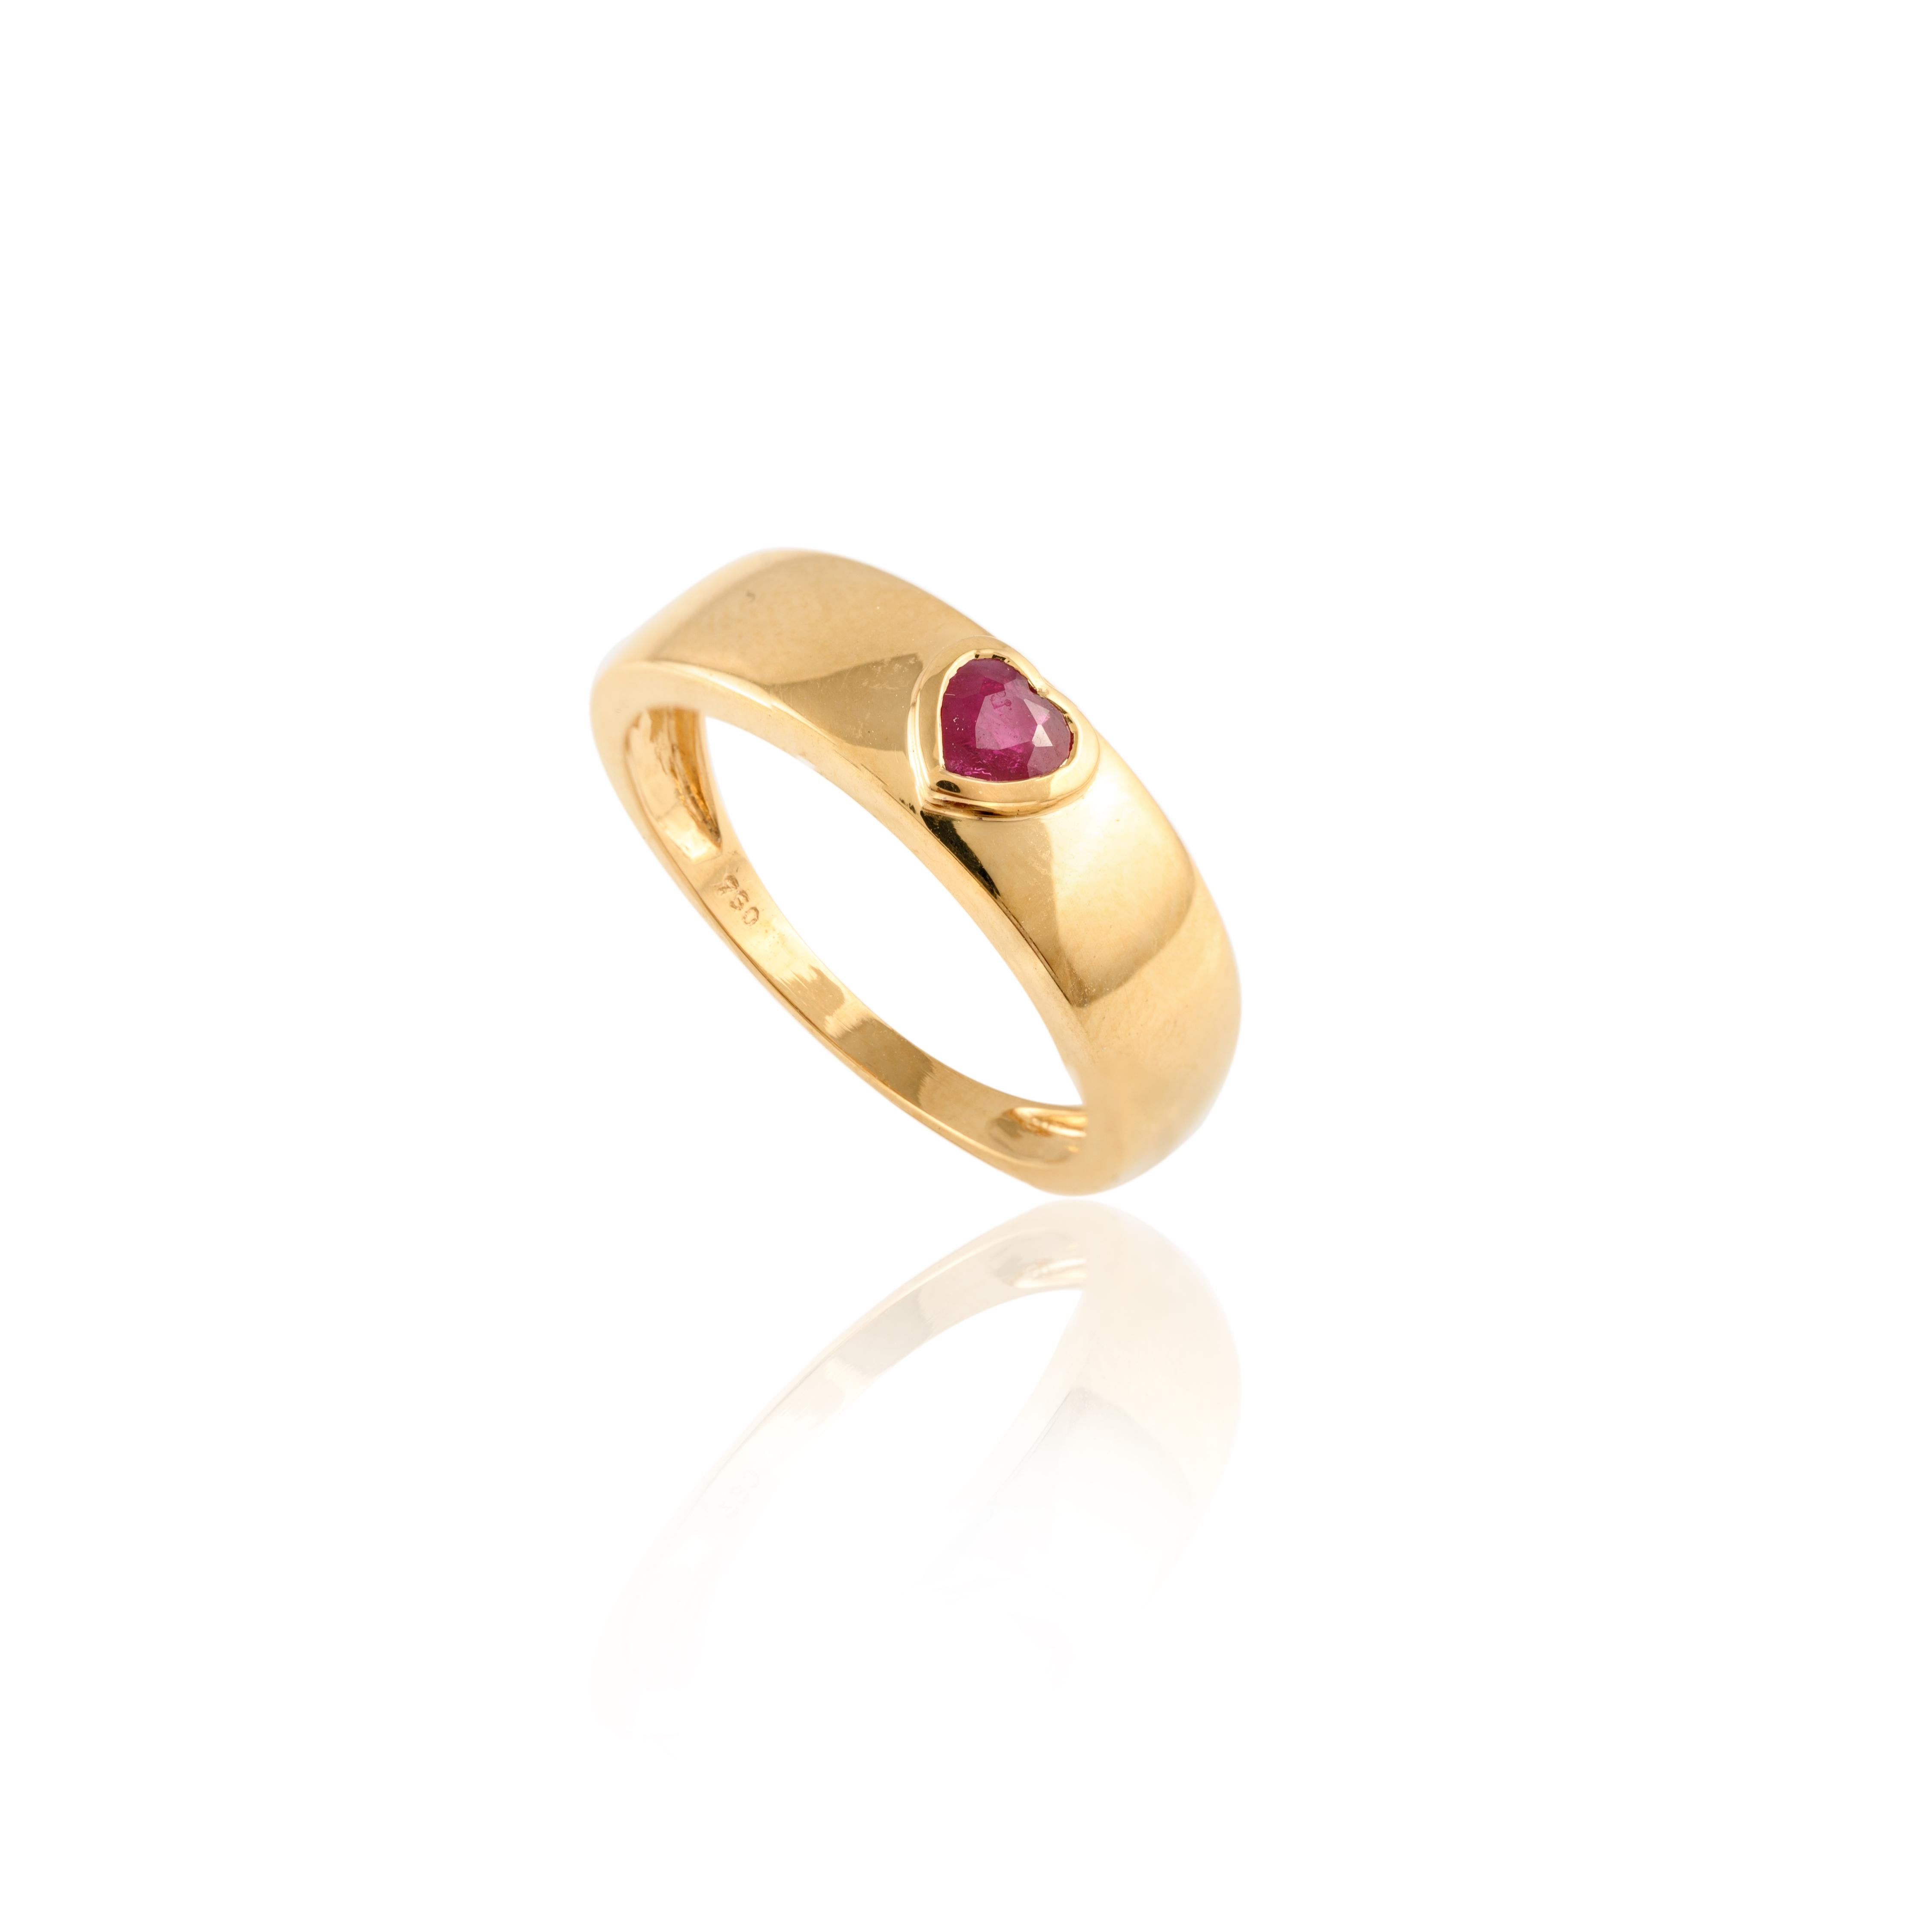 For Sale:  Dainty Heart Cut Ruby Mens Ring in 18k Solid Yellow Gold, Signet Ring for Her 2